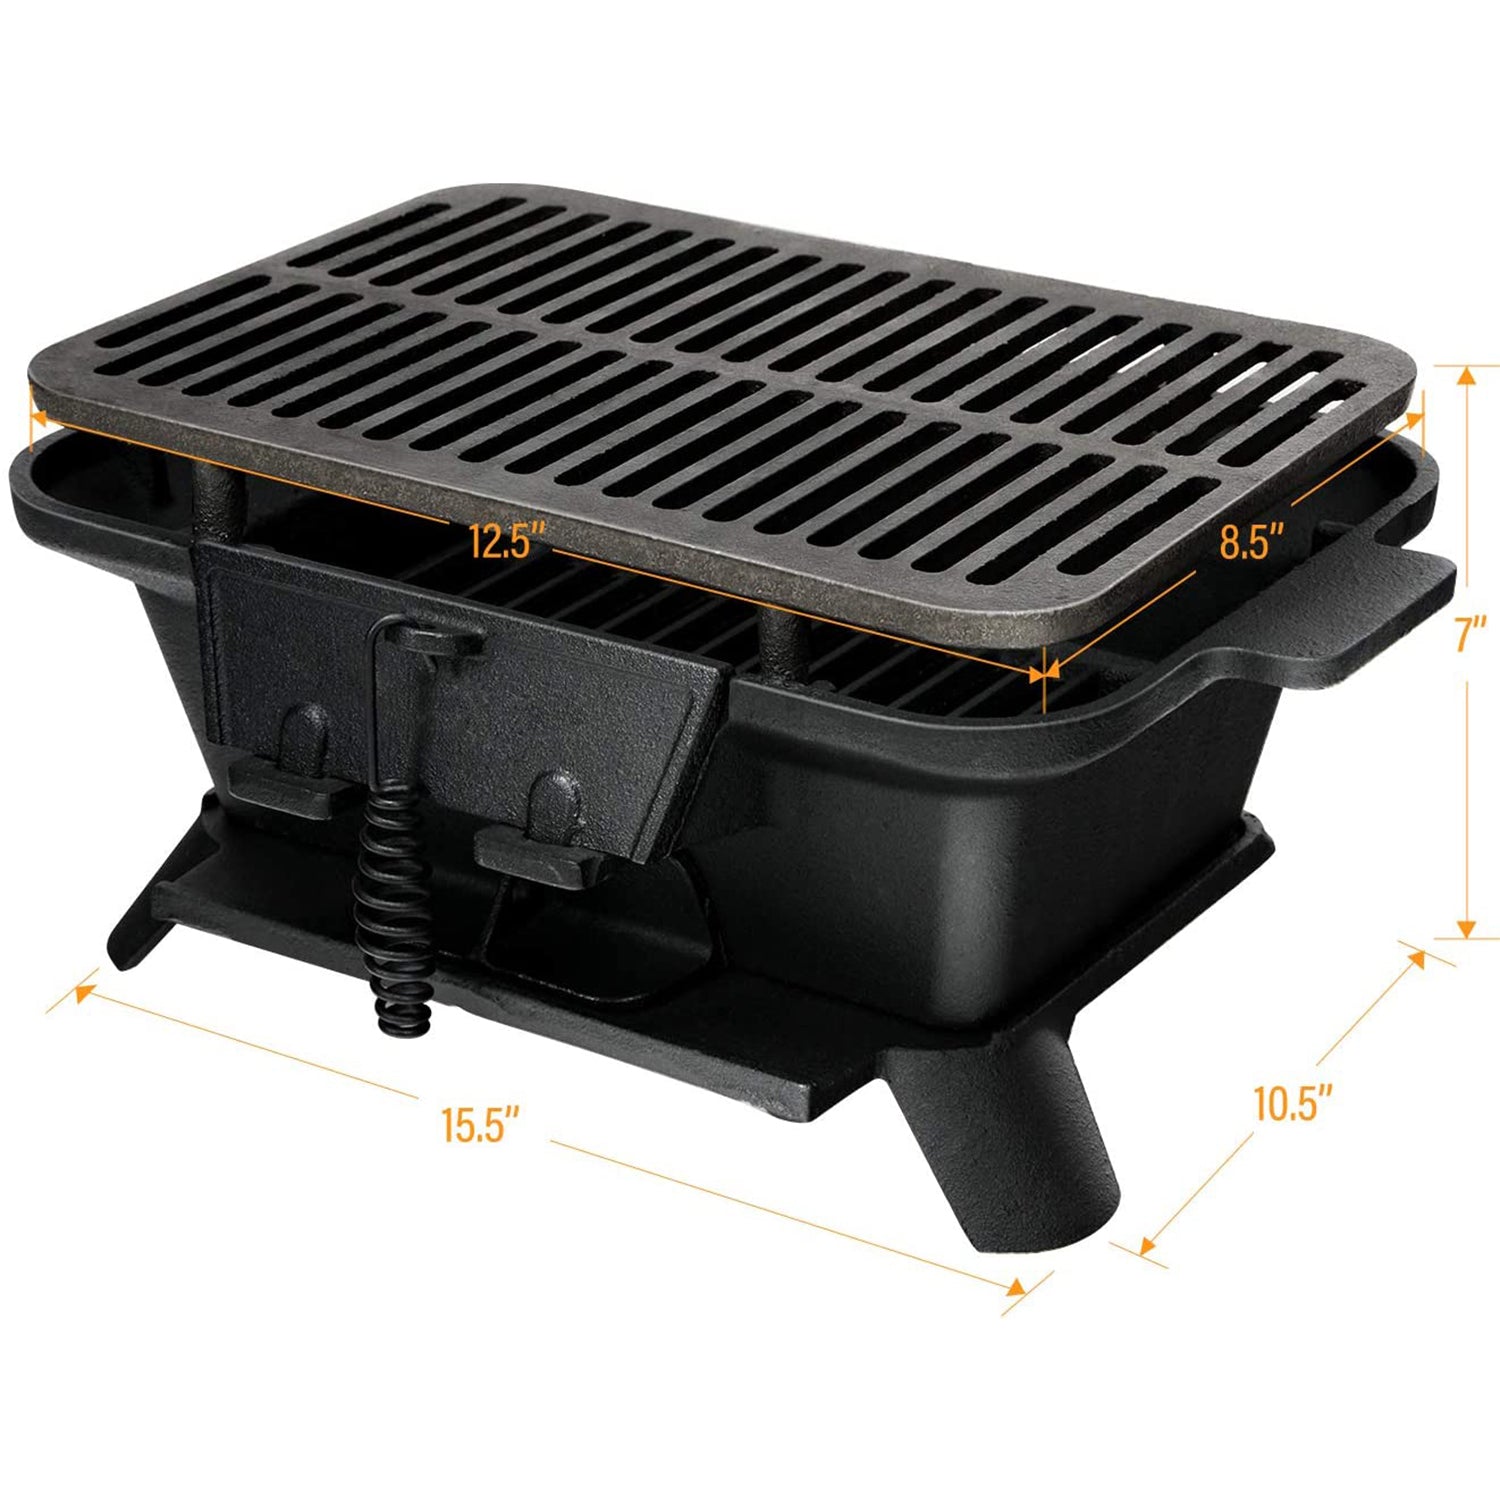 Heavy-Duty Portable Cast Iron Charcoal Grill in Black